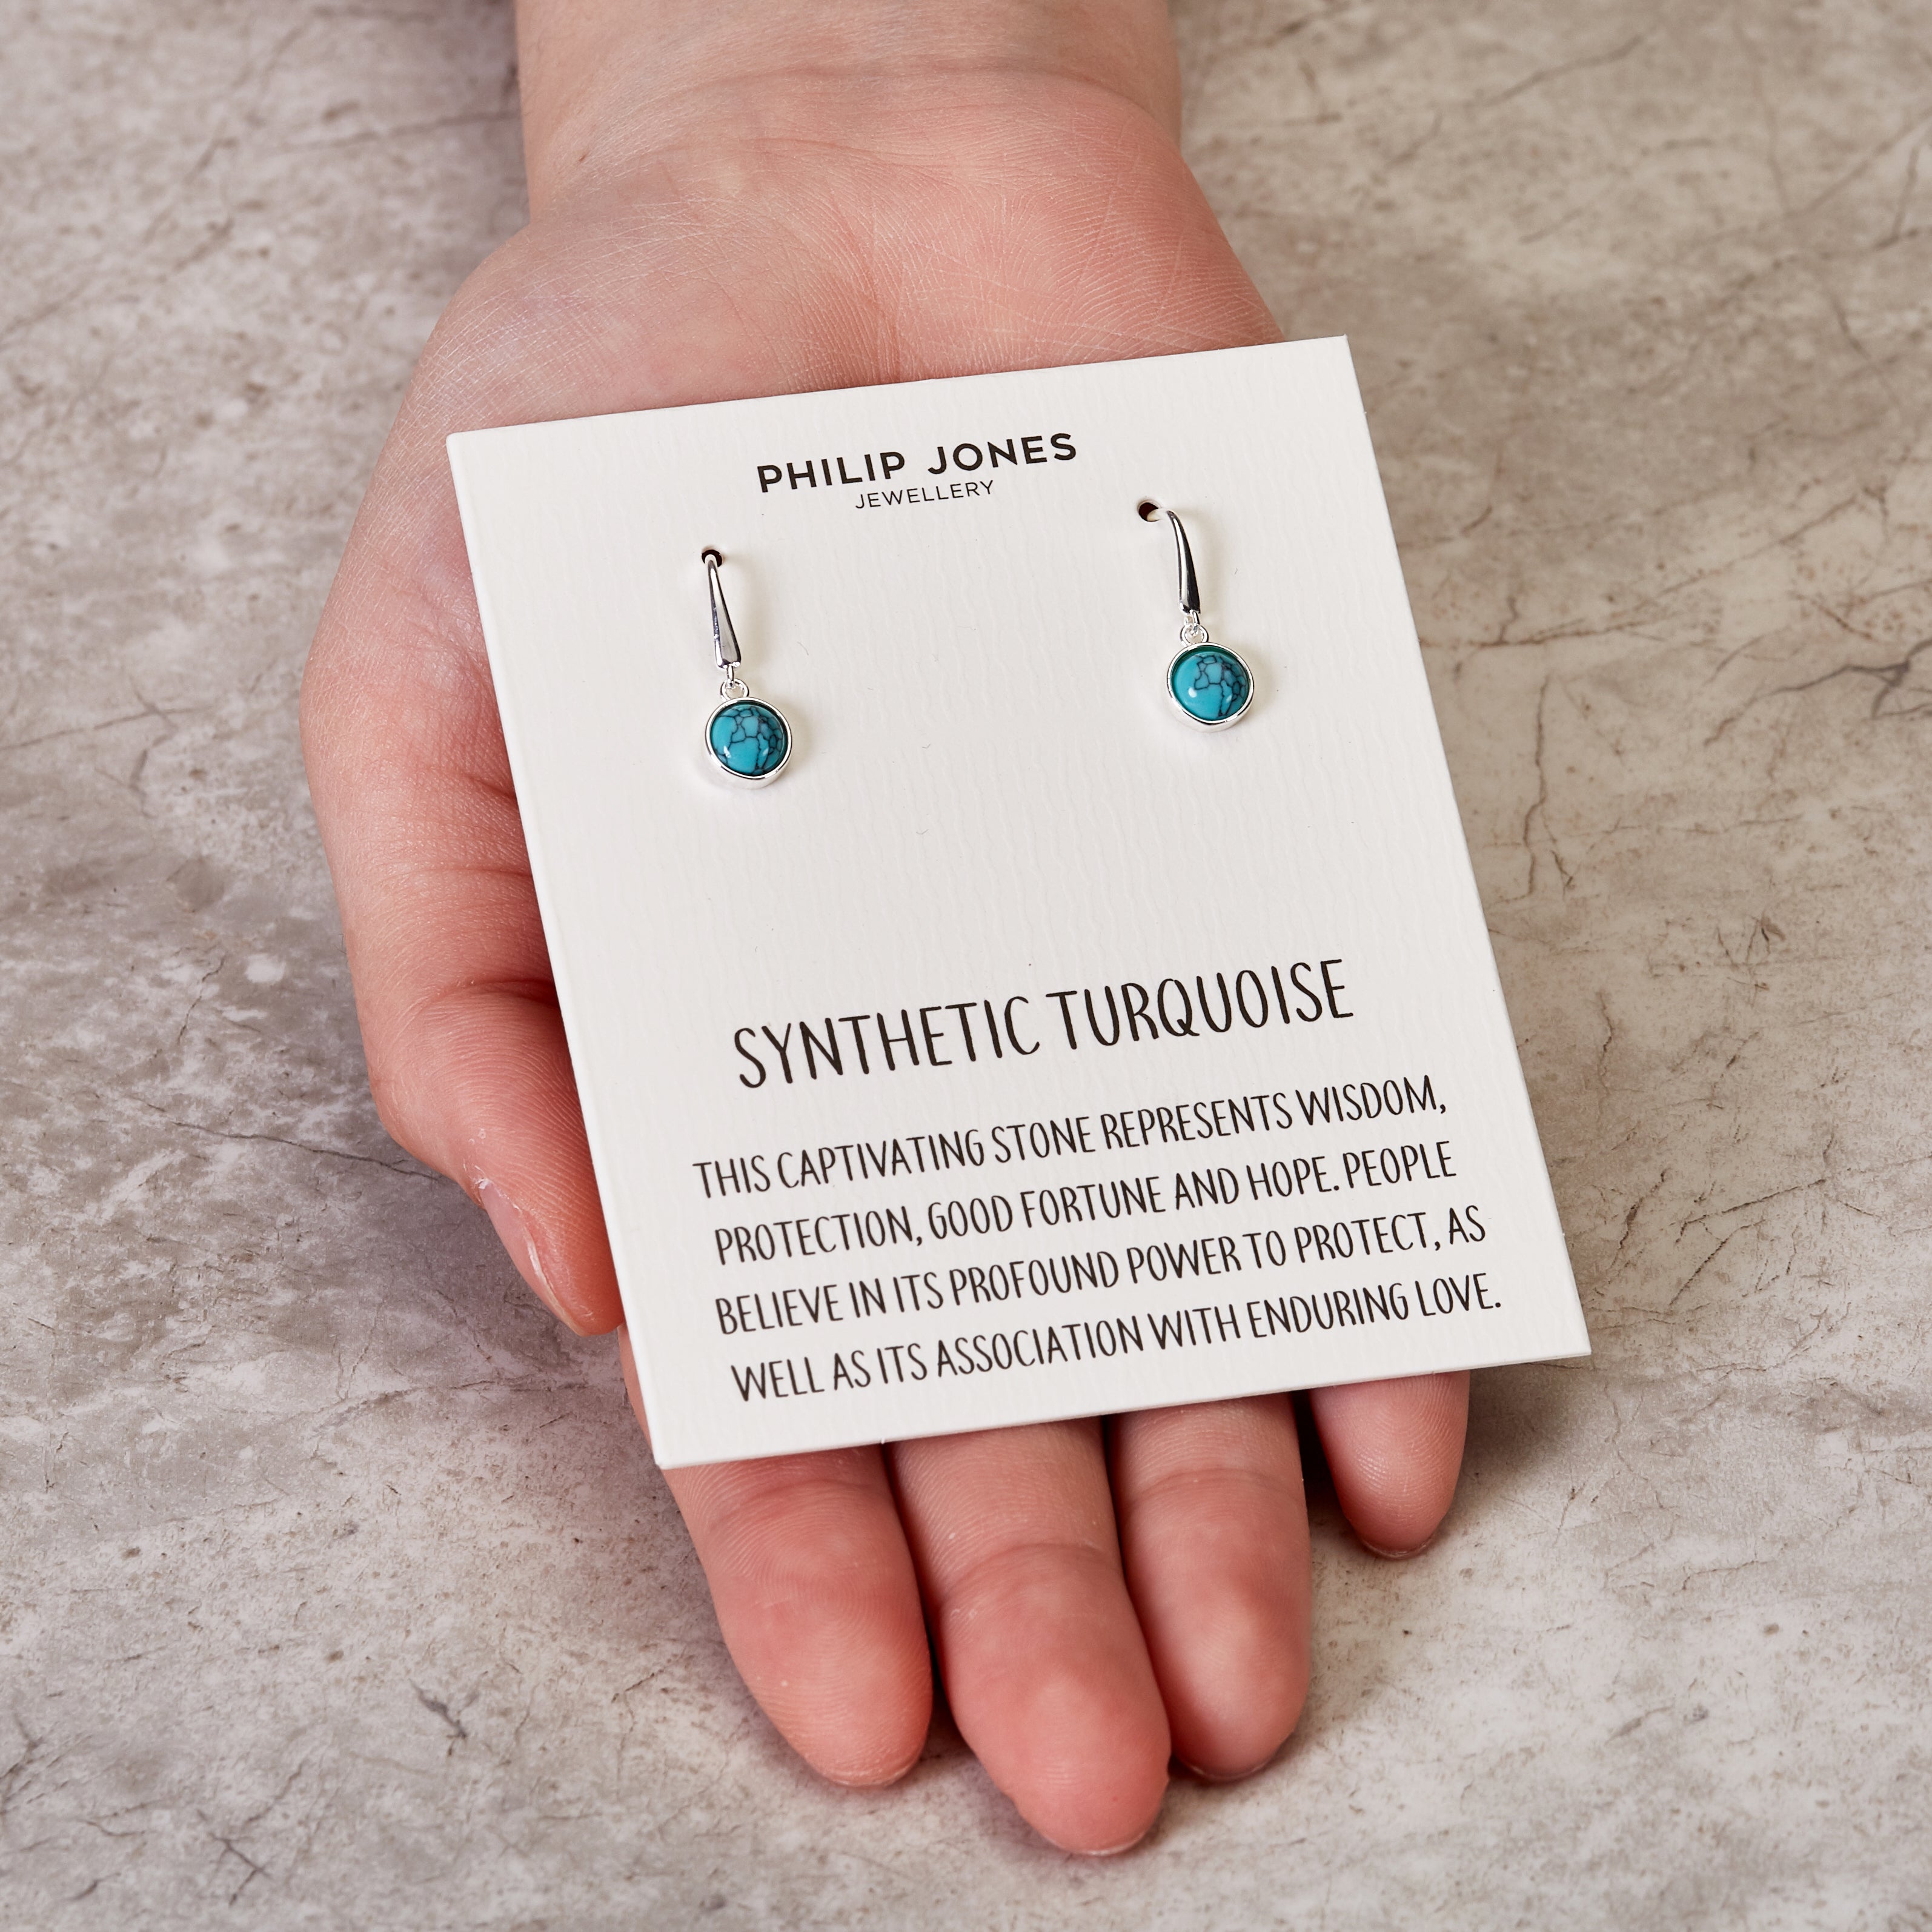 Synthetic Turquoise Drop Earrings with Quote Card